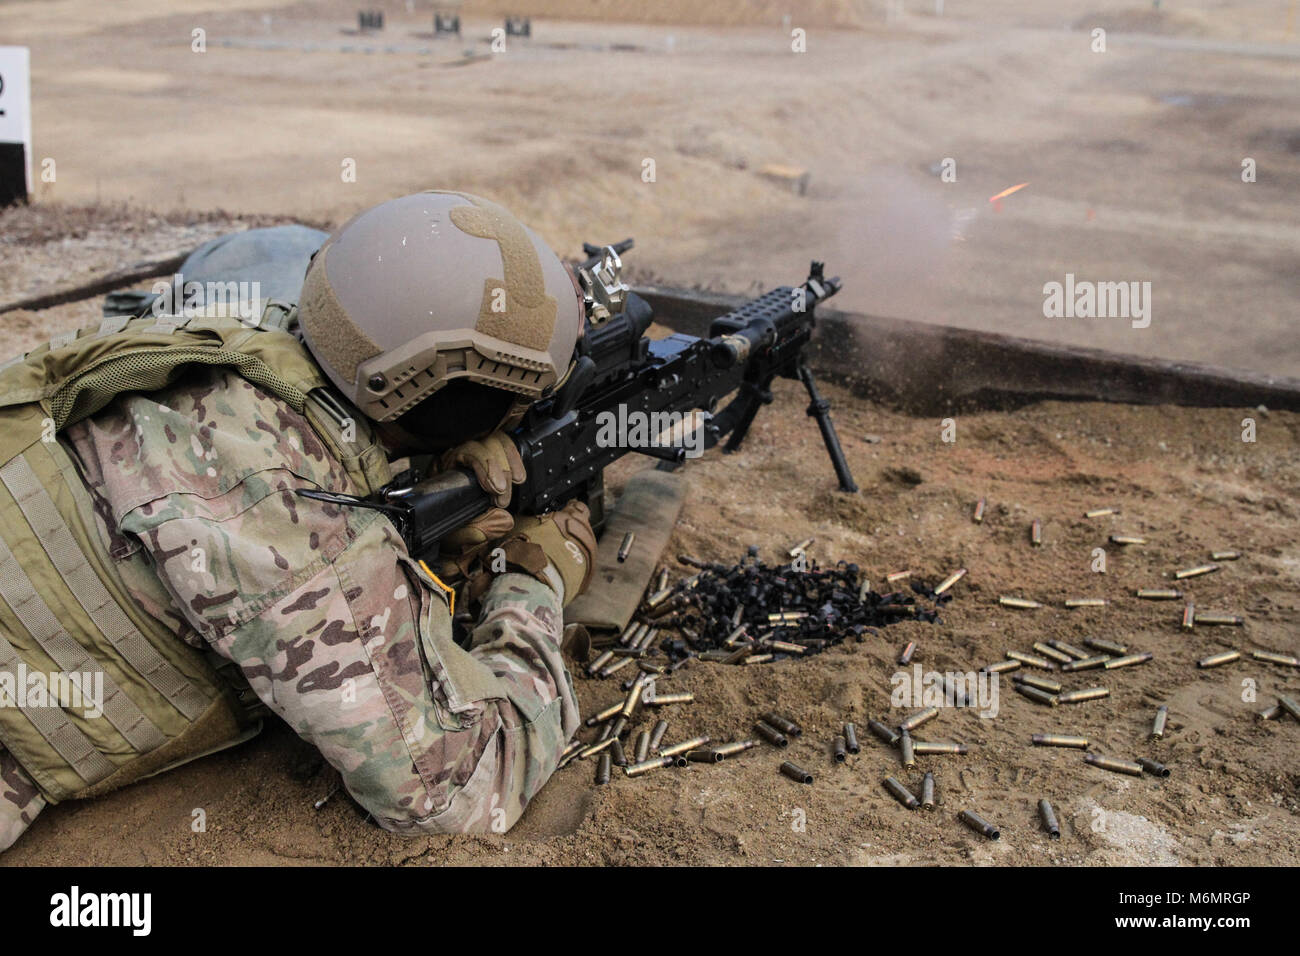 U.S. Army Special Forces Soldier assigned to 1st Battalion, 1st Special Forces Group (Airborne), fires a M249B on a qualification course during exercise Valor Knife at Warrior Base, Republic Of Korea., January 19, 2018. Soldiers participated in weapon familiarization classes and range qualifications in order to gain overall knowledge of the M249B weapon system. (U.S Army Photo by Spc Agee, Aaron/Released) Stock Photo